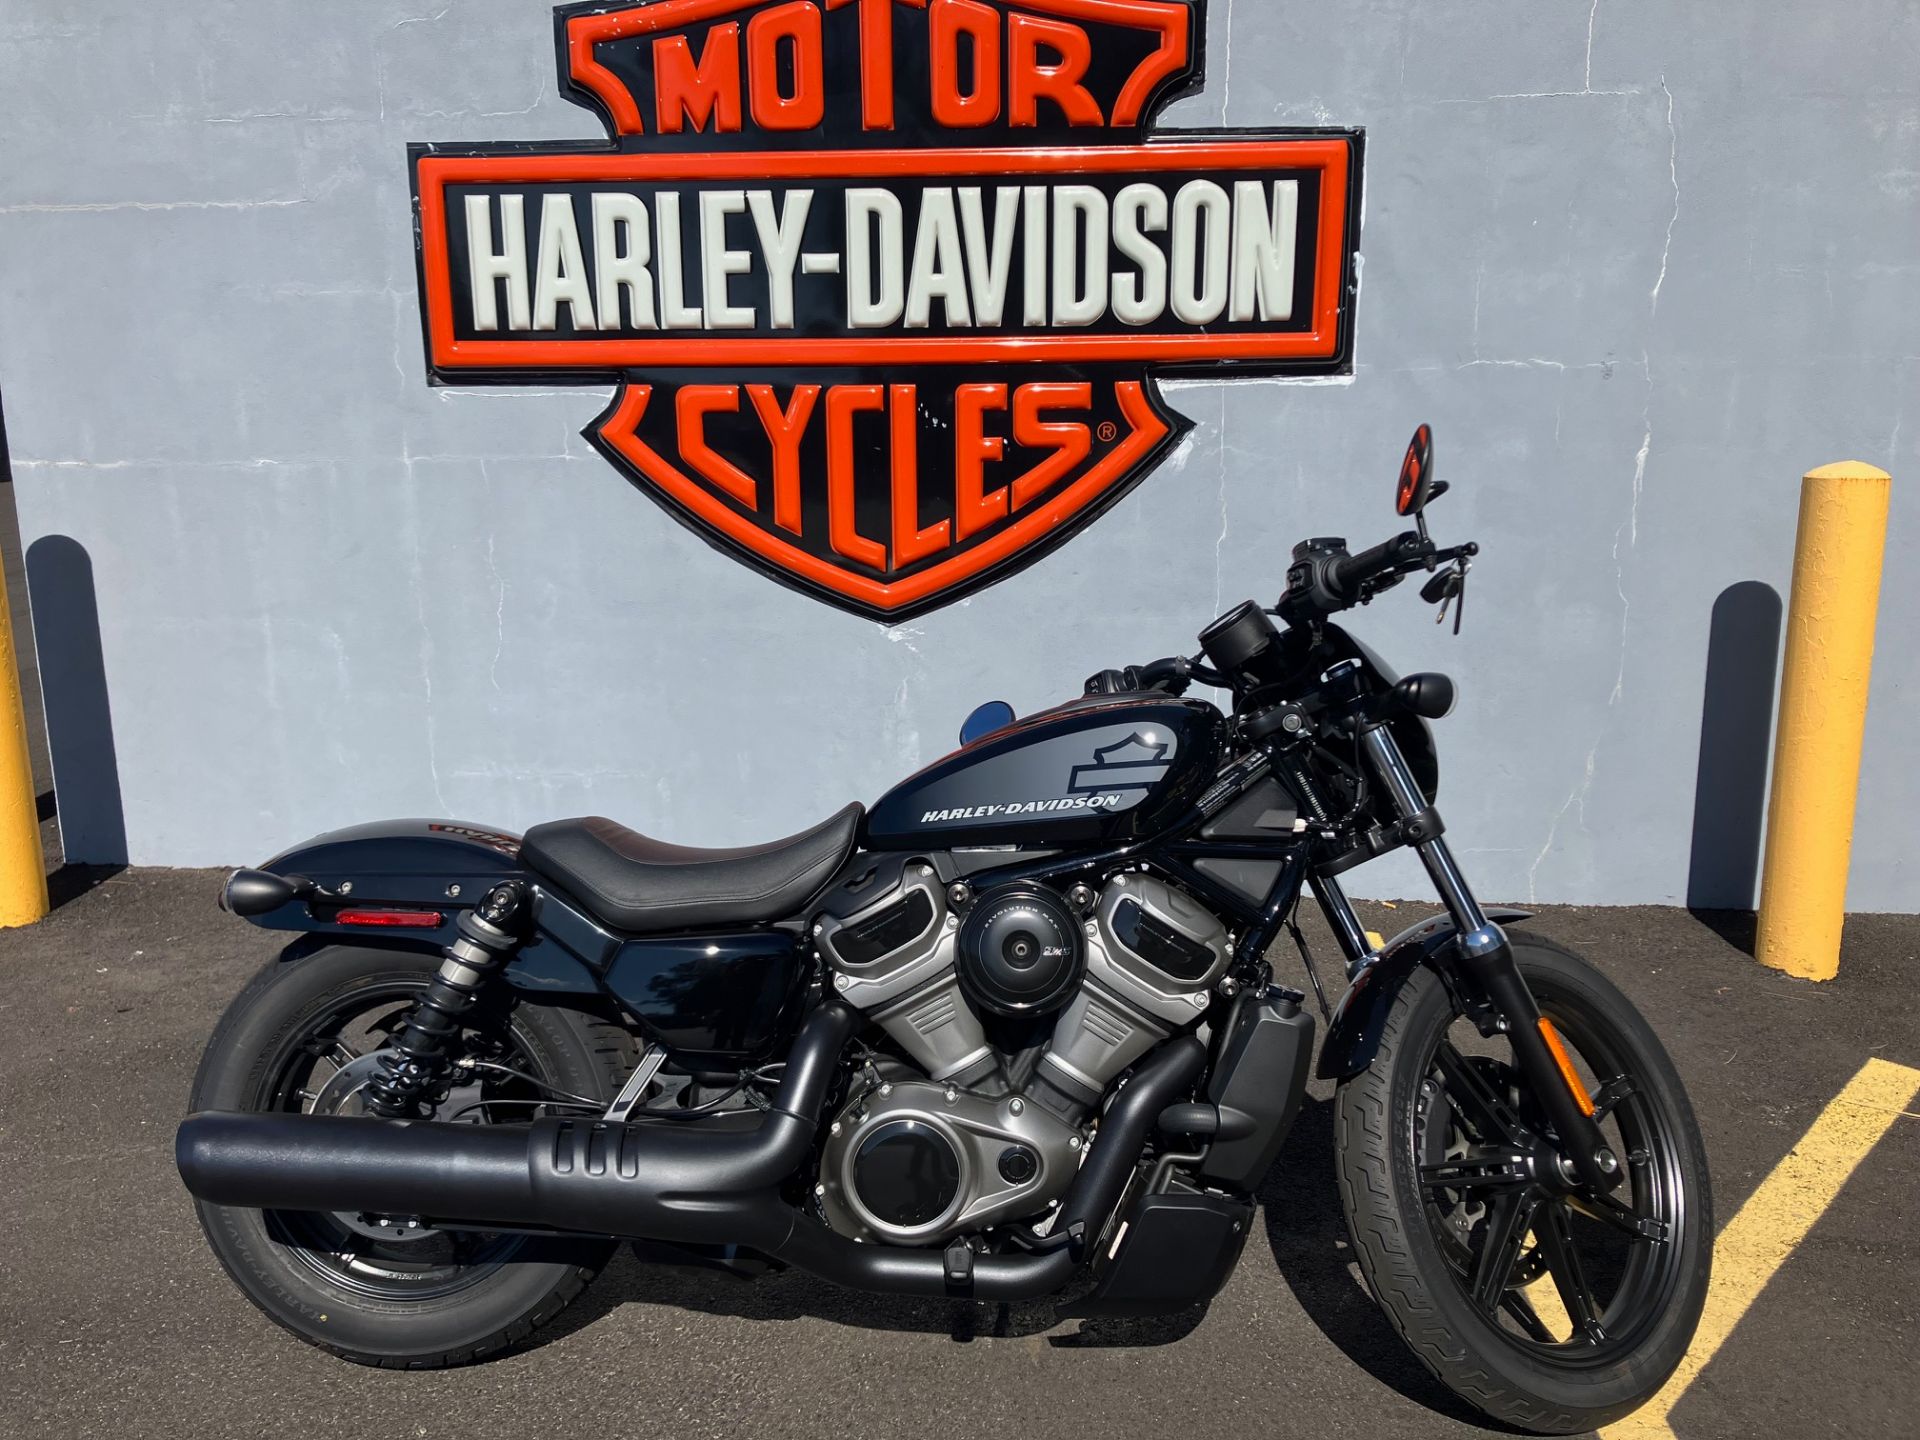 2022 Harley-Davidson NIGHTSTER in West Long Branch, New Jersey - Photo 1